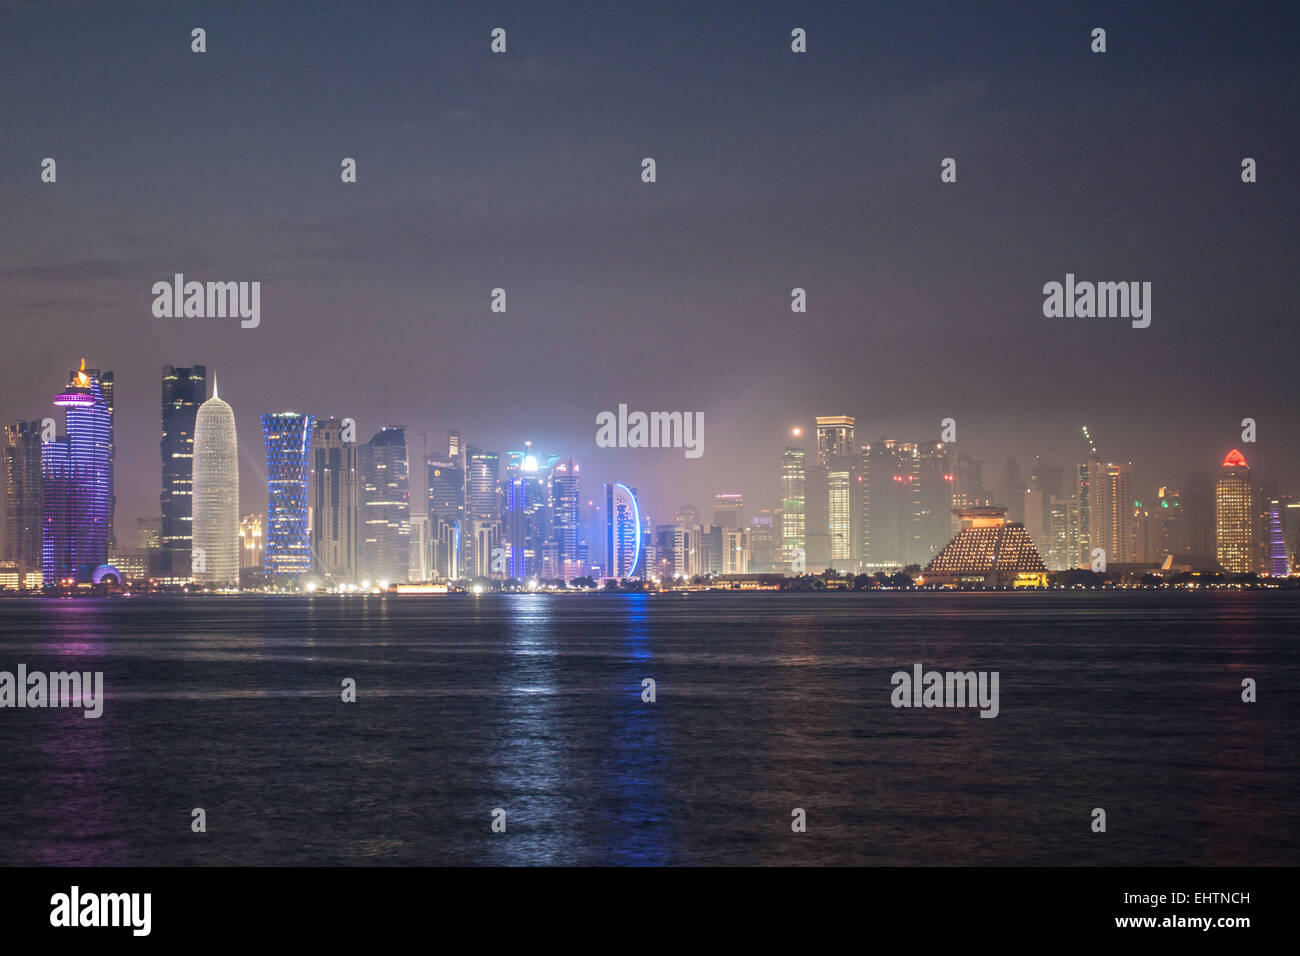 ILLUSTRATION OF QATAR, PERSIAN GULF, MIDDLE EAST Stock Photo